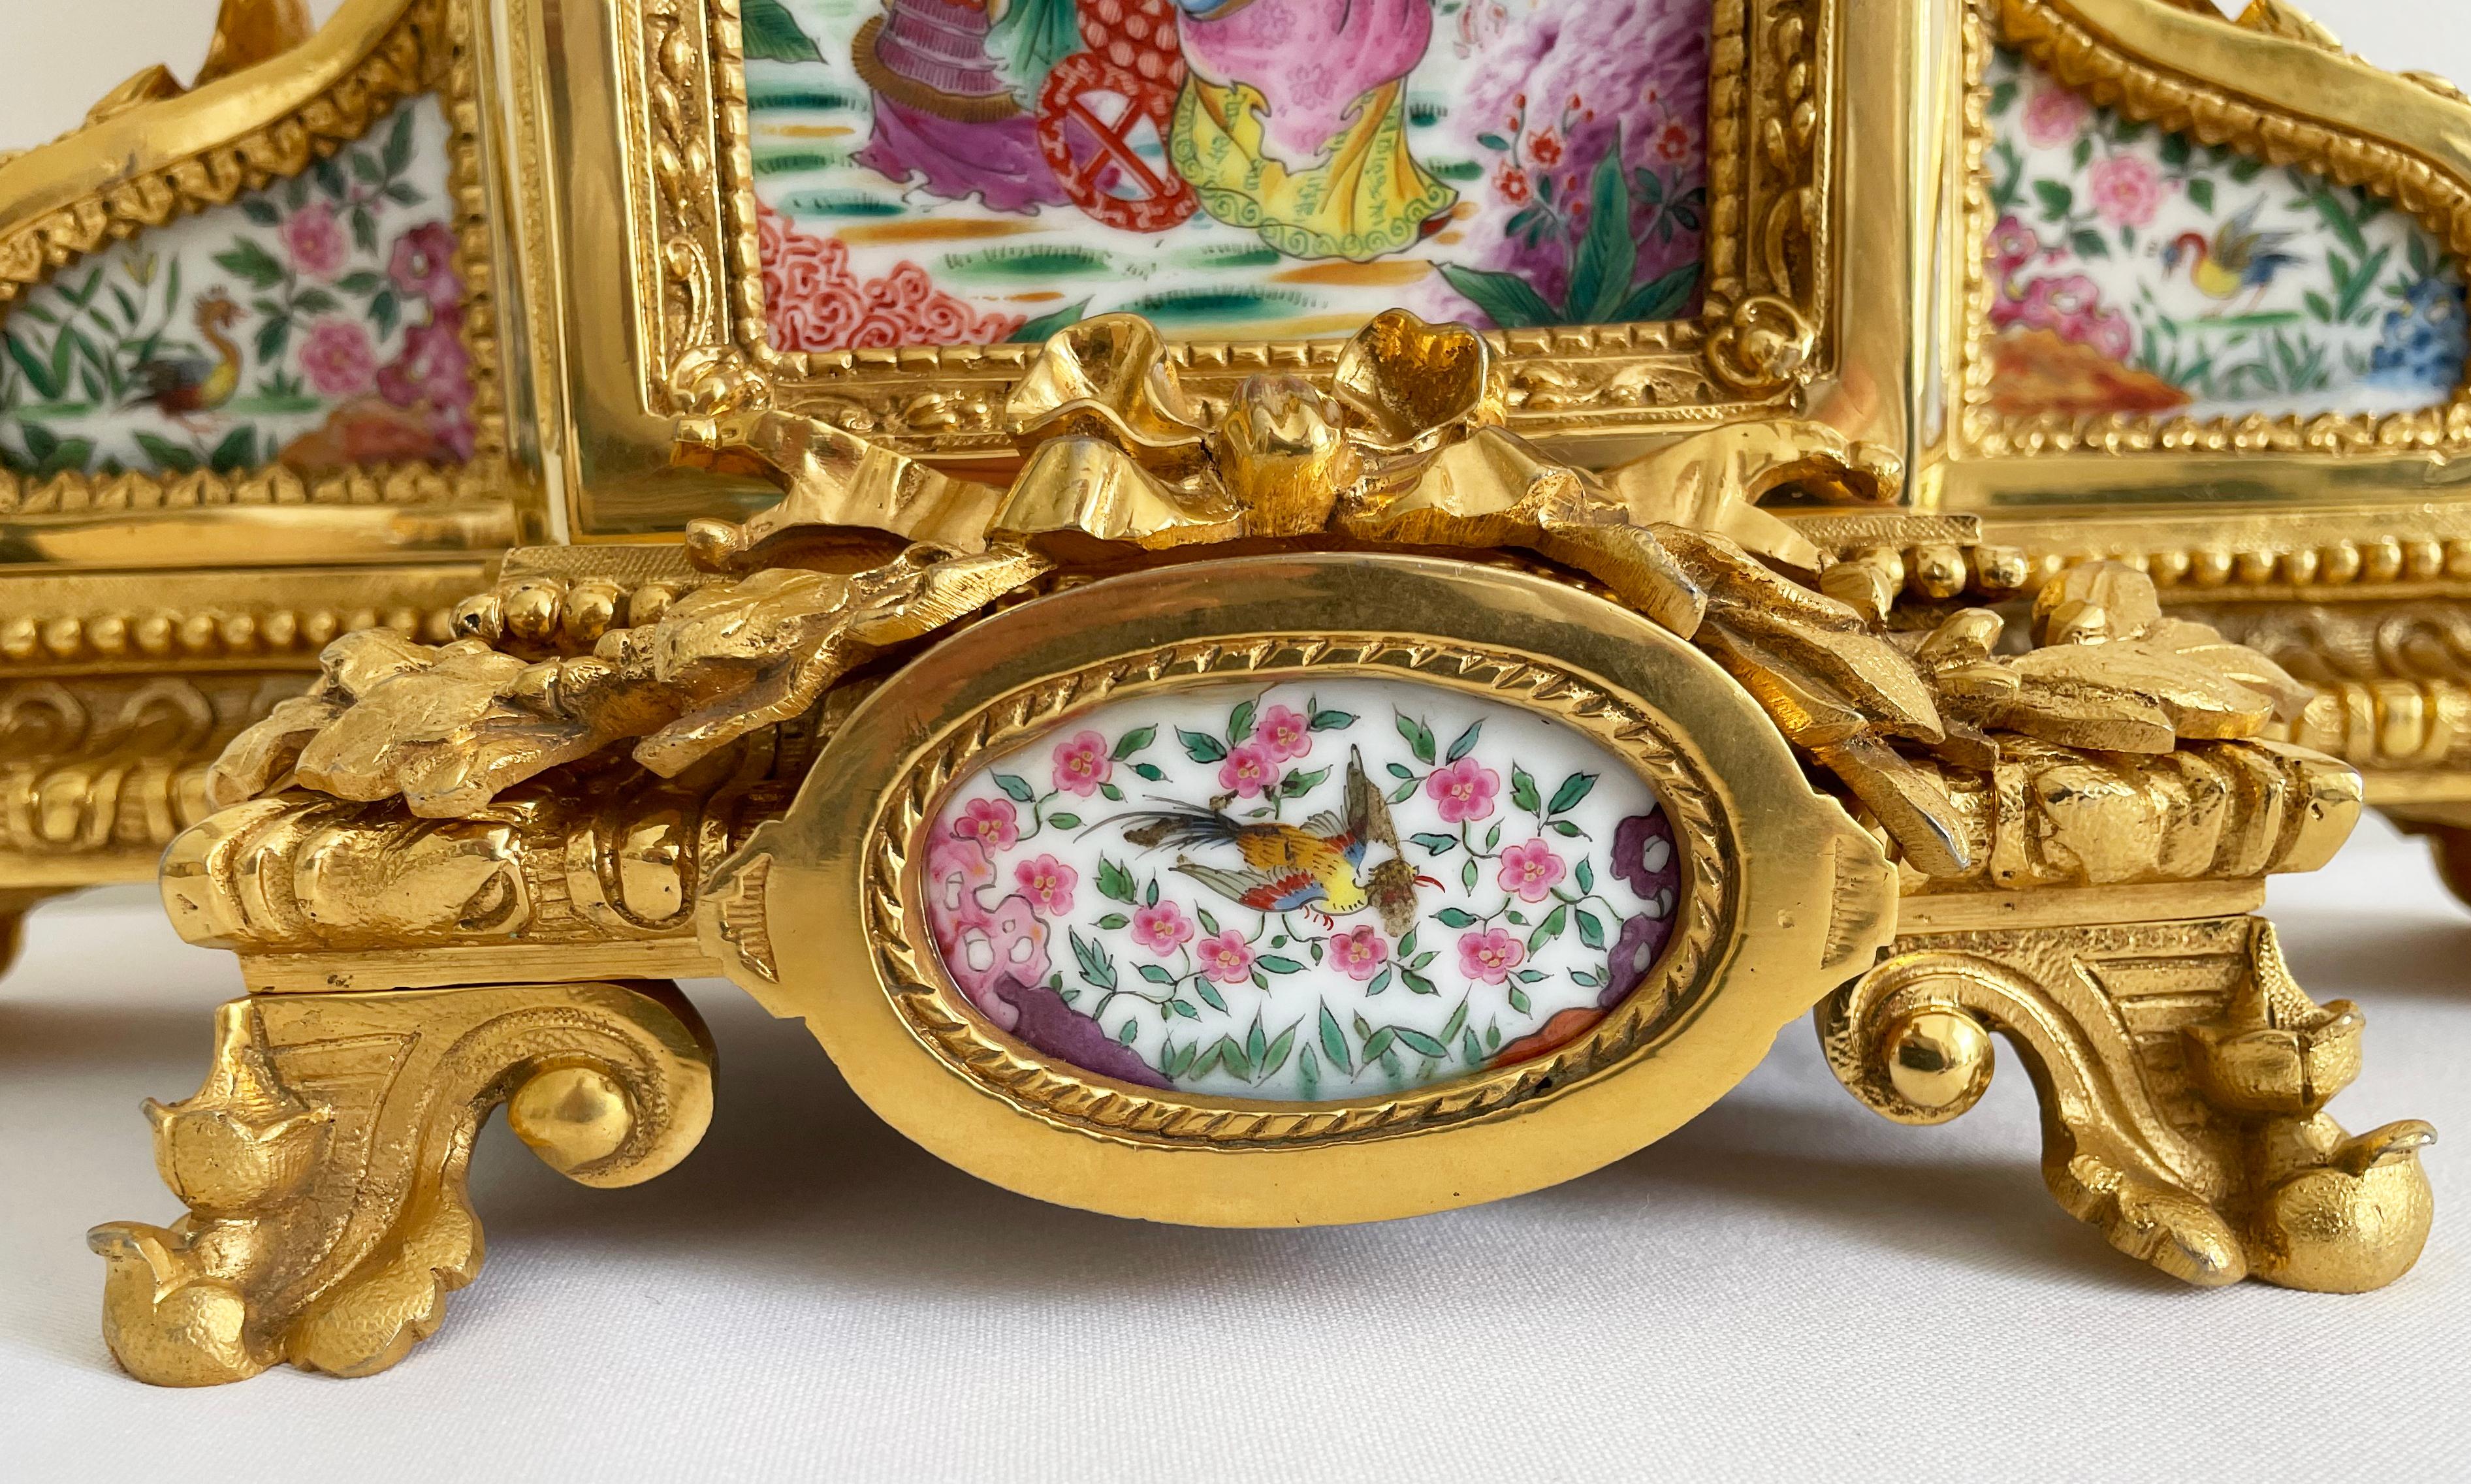 French Gilt Bronze And Porcelain Chinoiserie Themed Mantel Clock, 19th Century For Sale 5